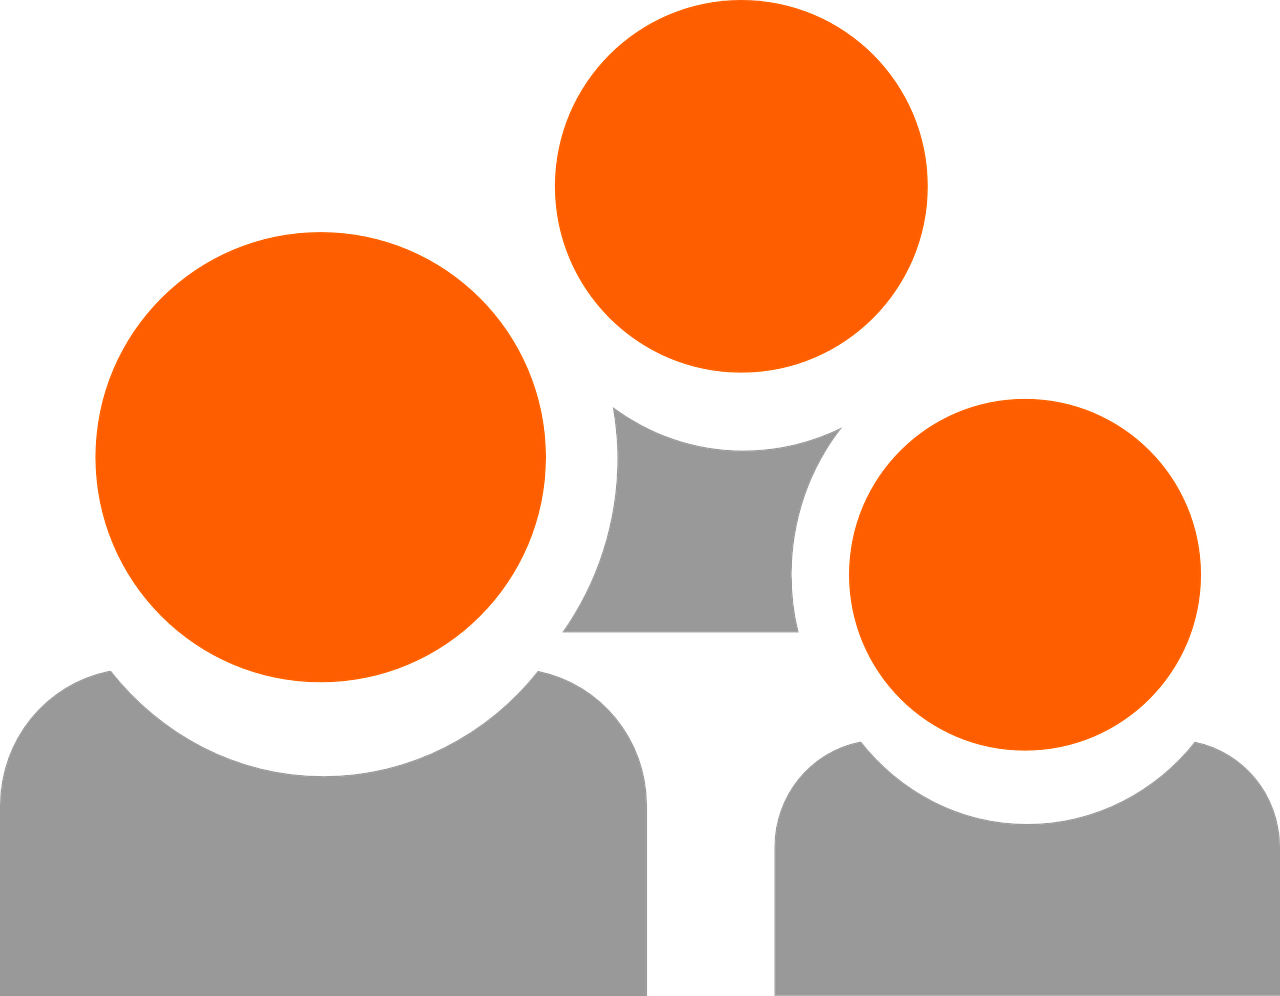 a circle of six simple cartoon people that are gray, with one orange person that stand out